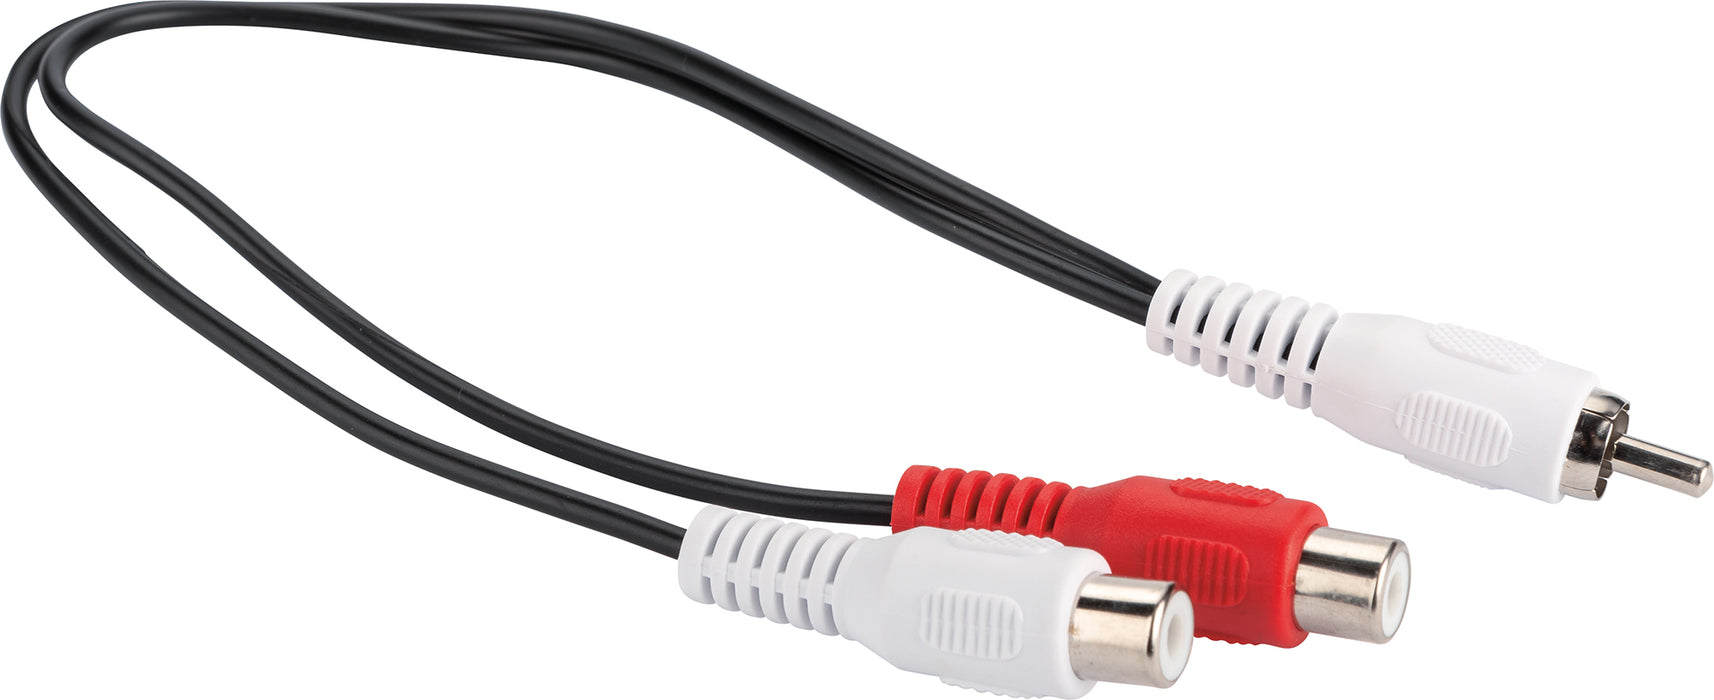 AUDIO Y adapter cable